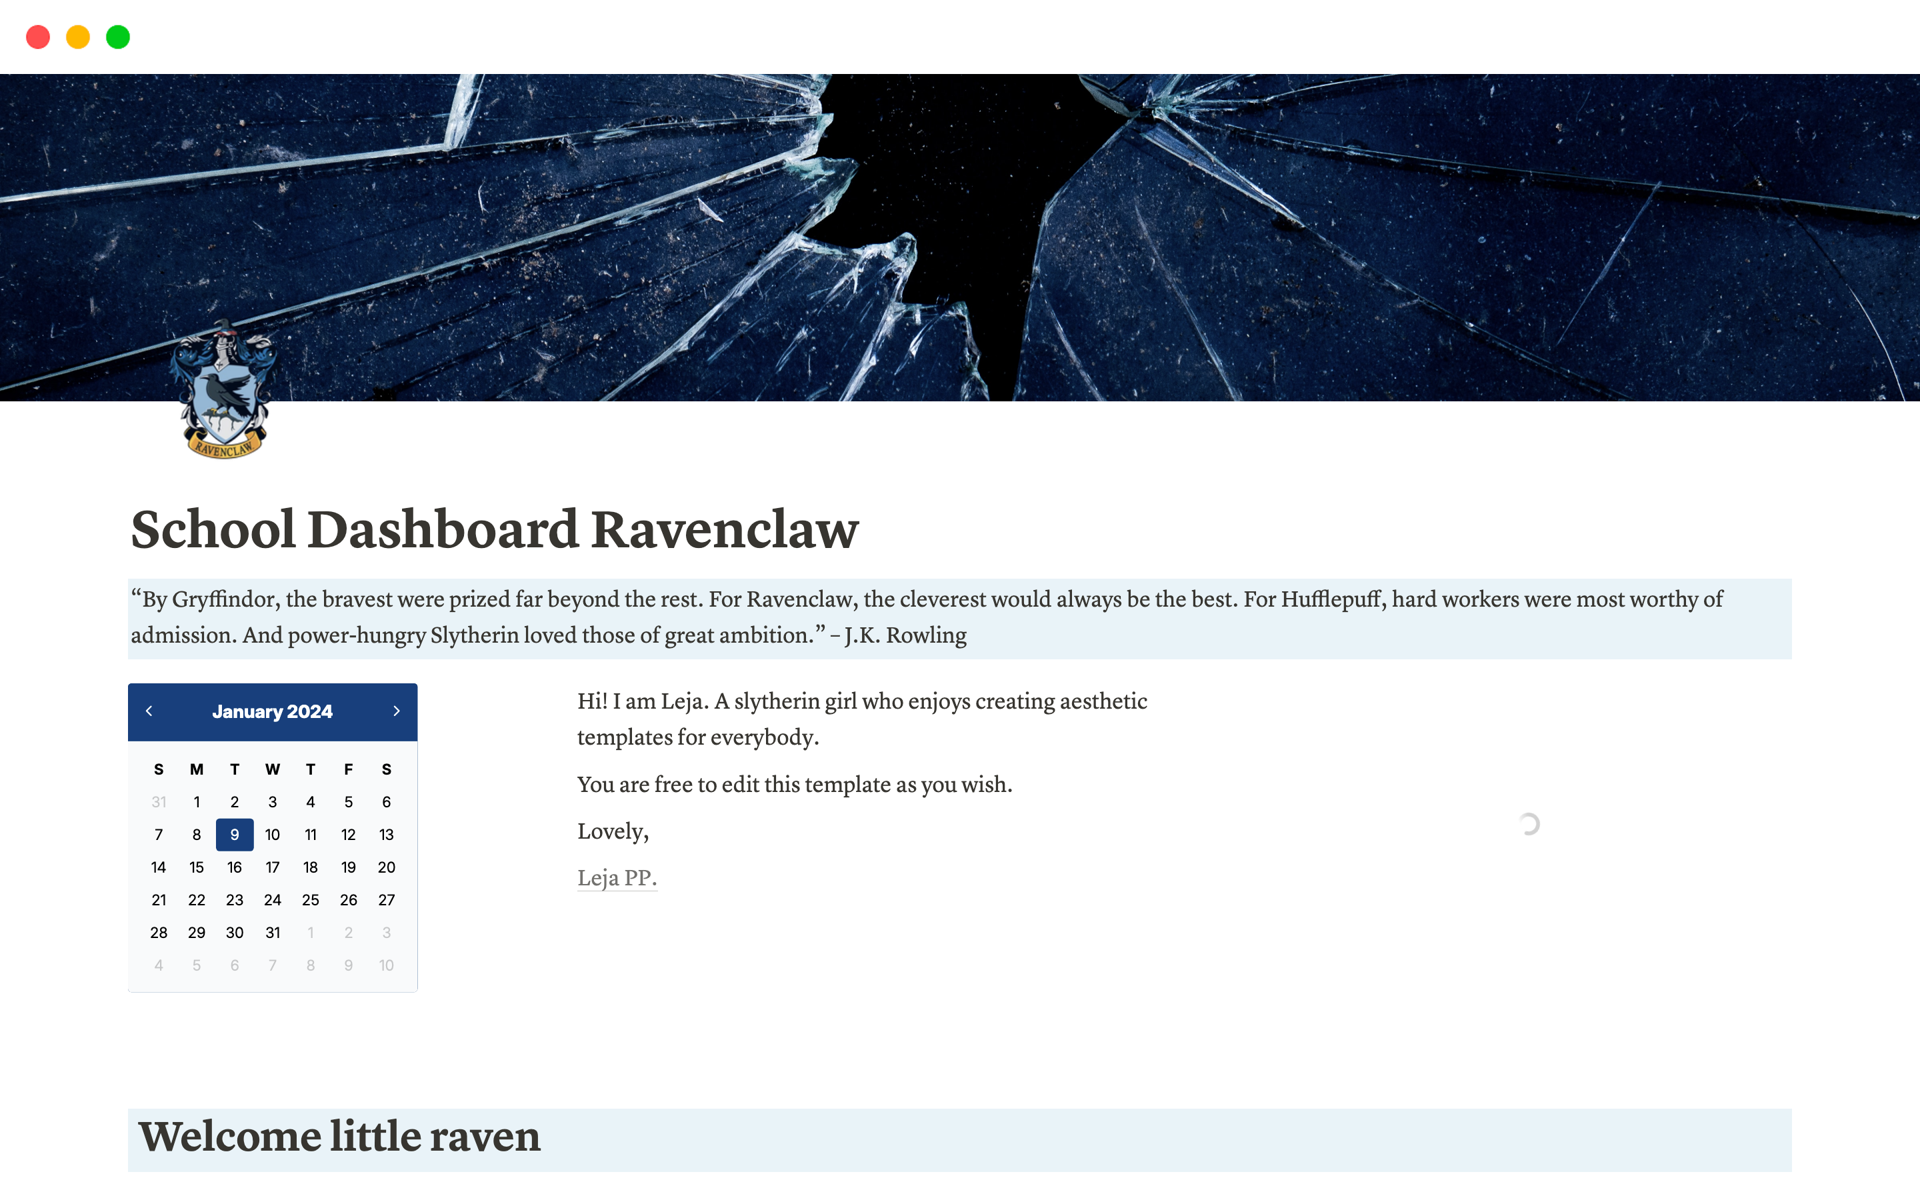 A school dashboard template for Ravenclaws.